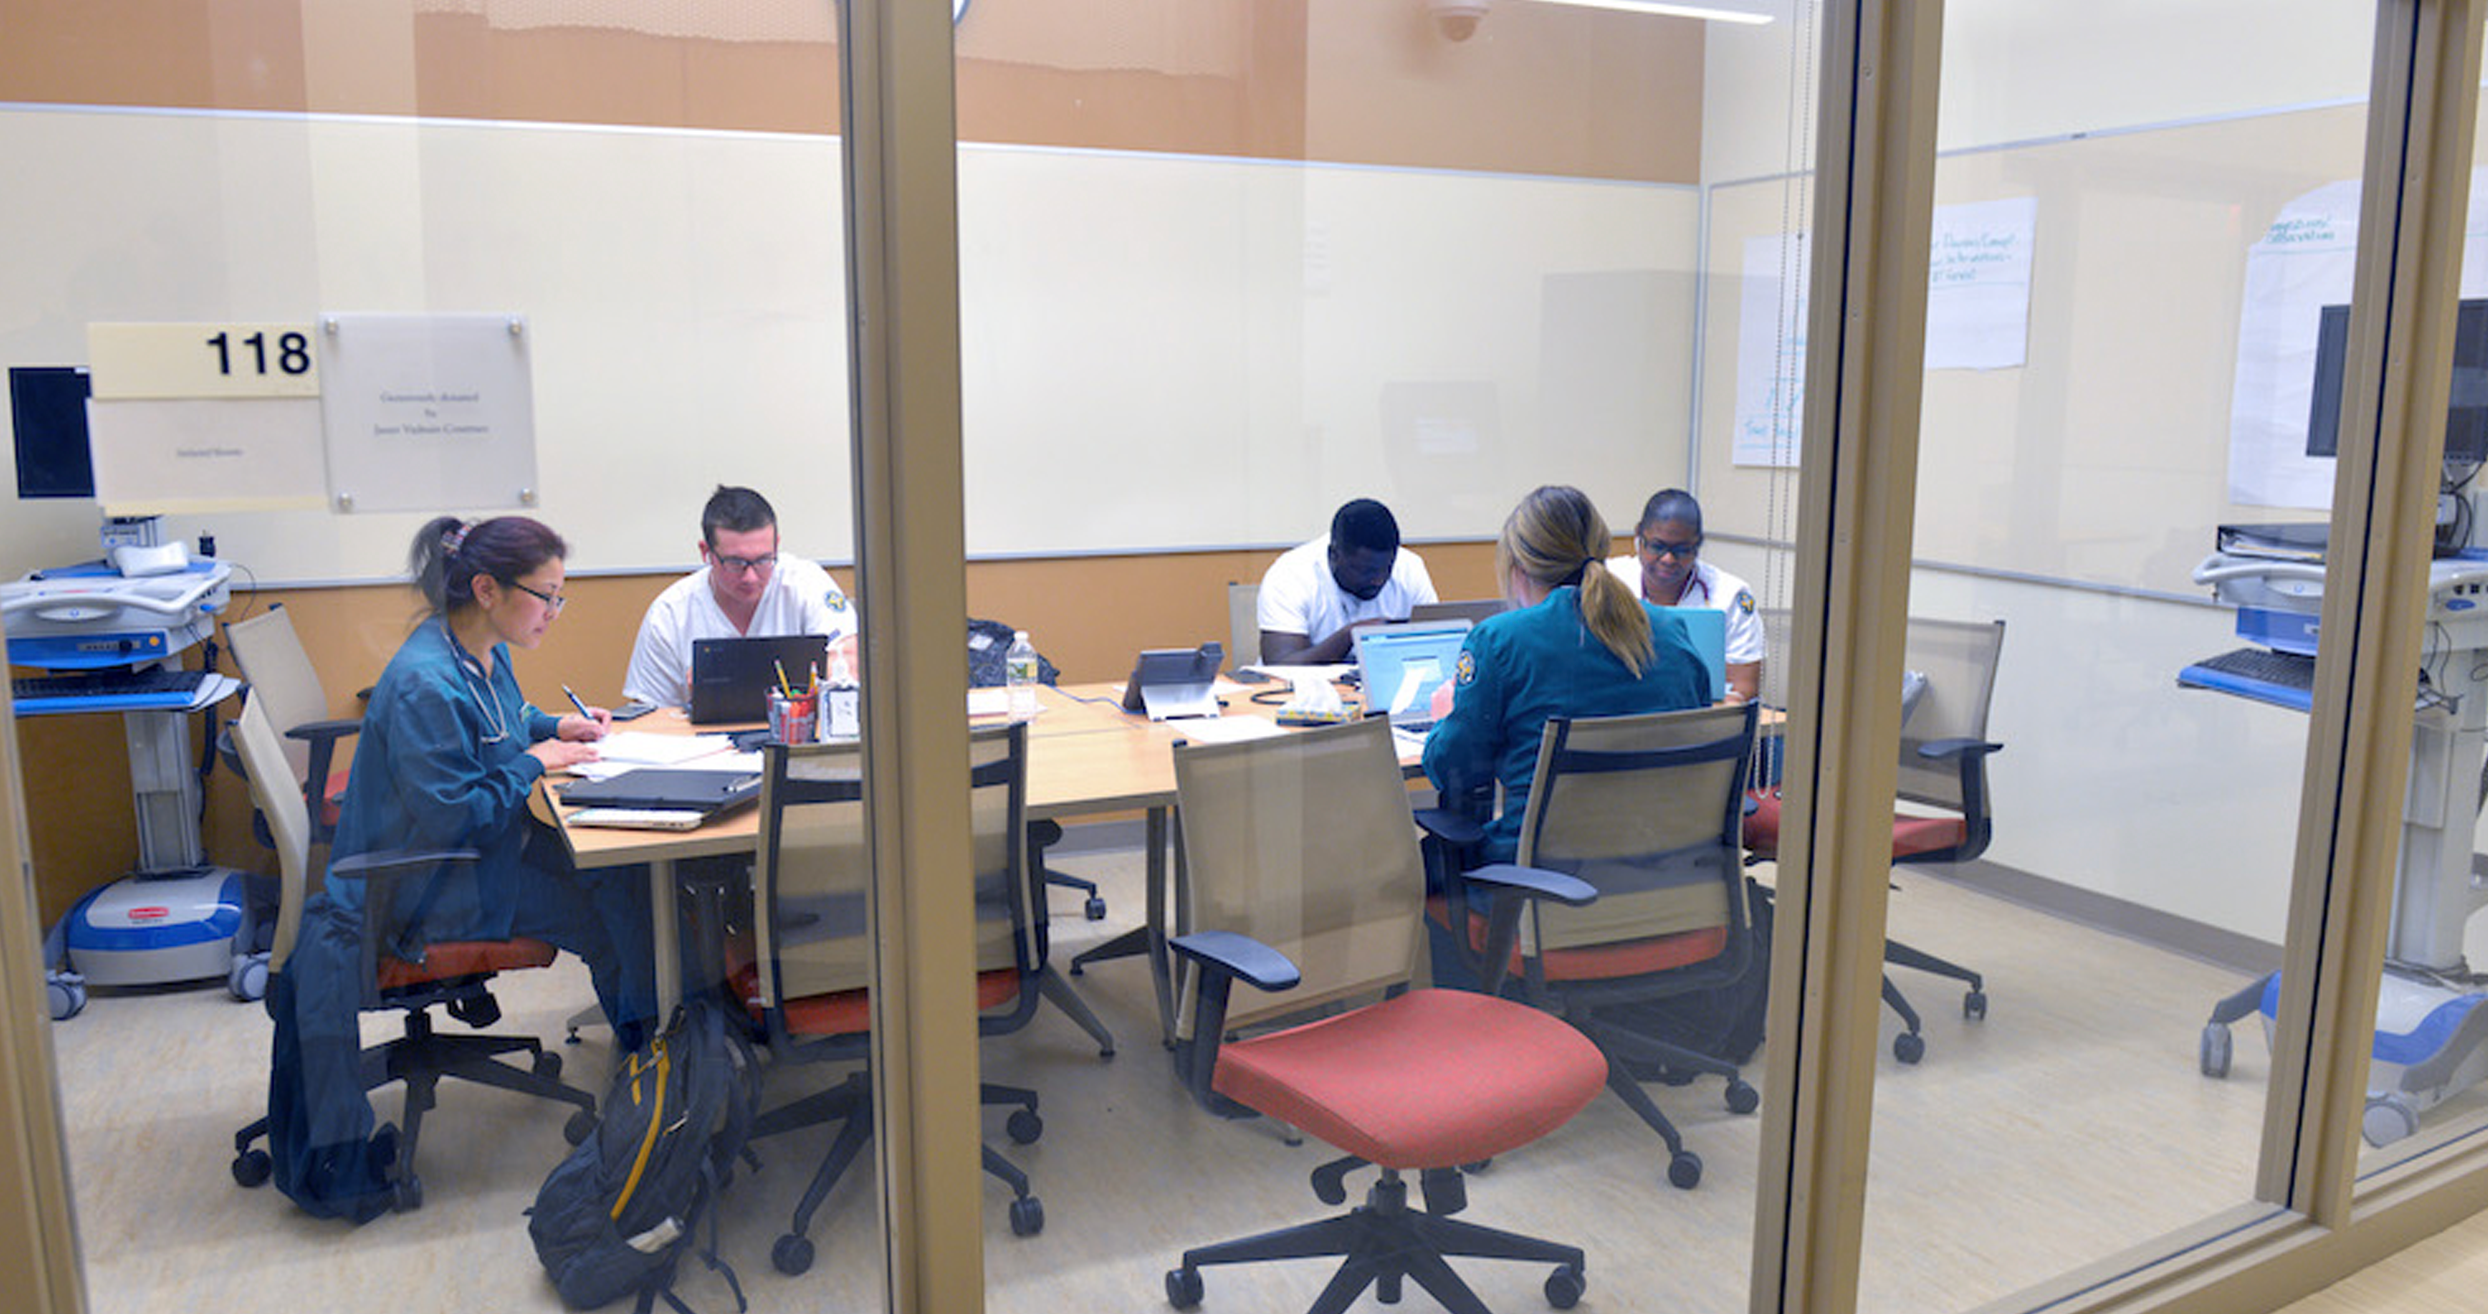 Healthcare students study together in a conference room